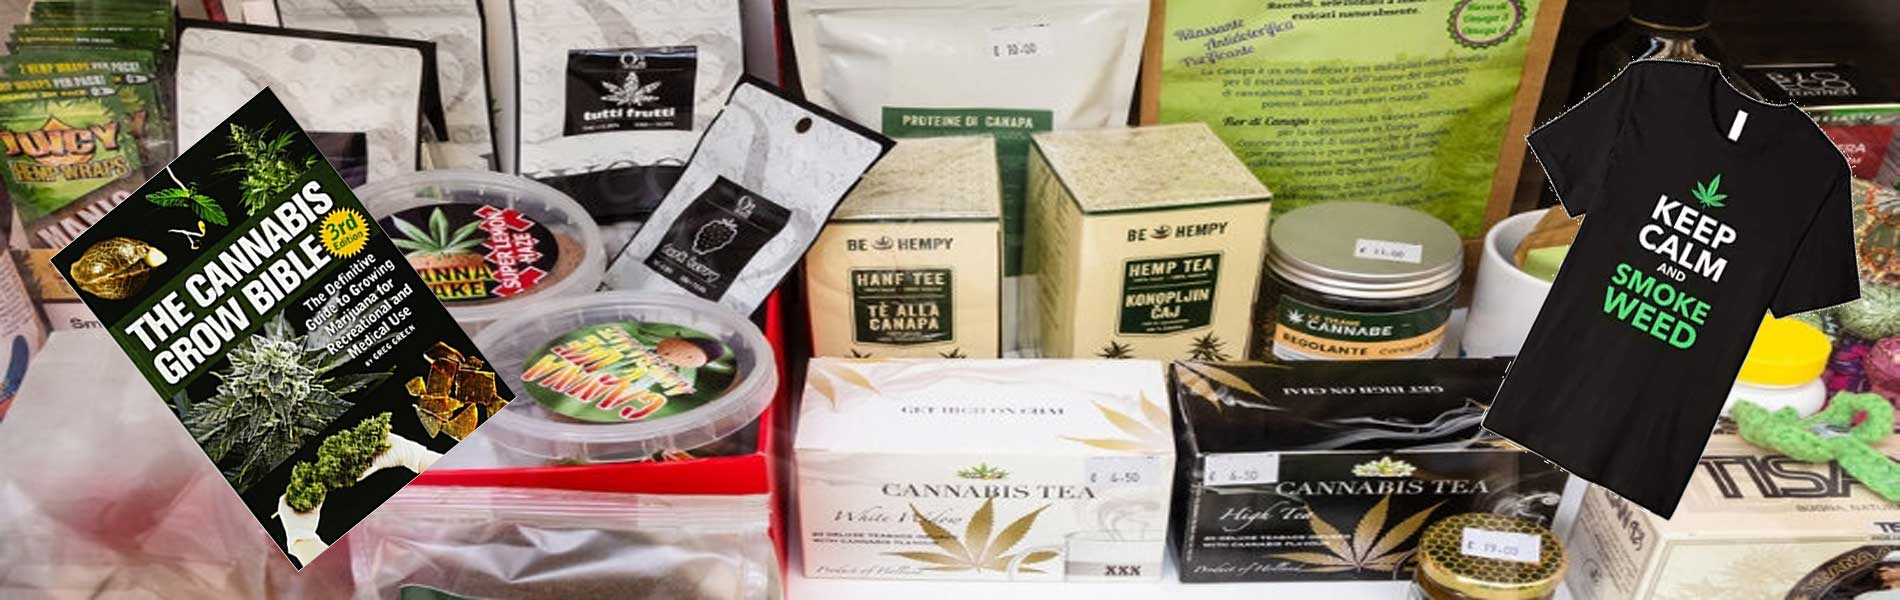 We Have the Largest Selection of Cannabis, Marijuana & Hemp Related Items